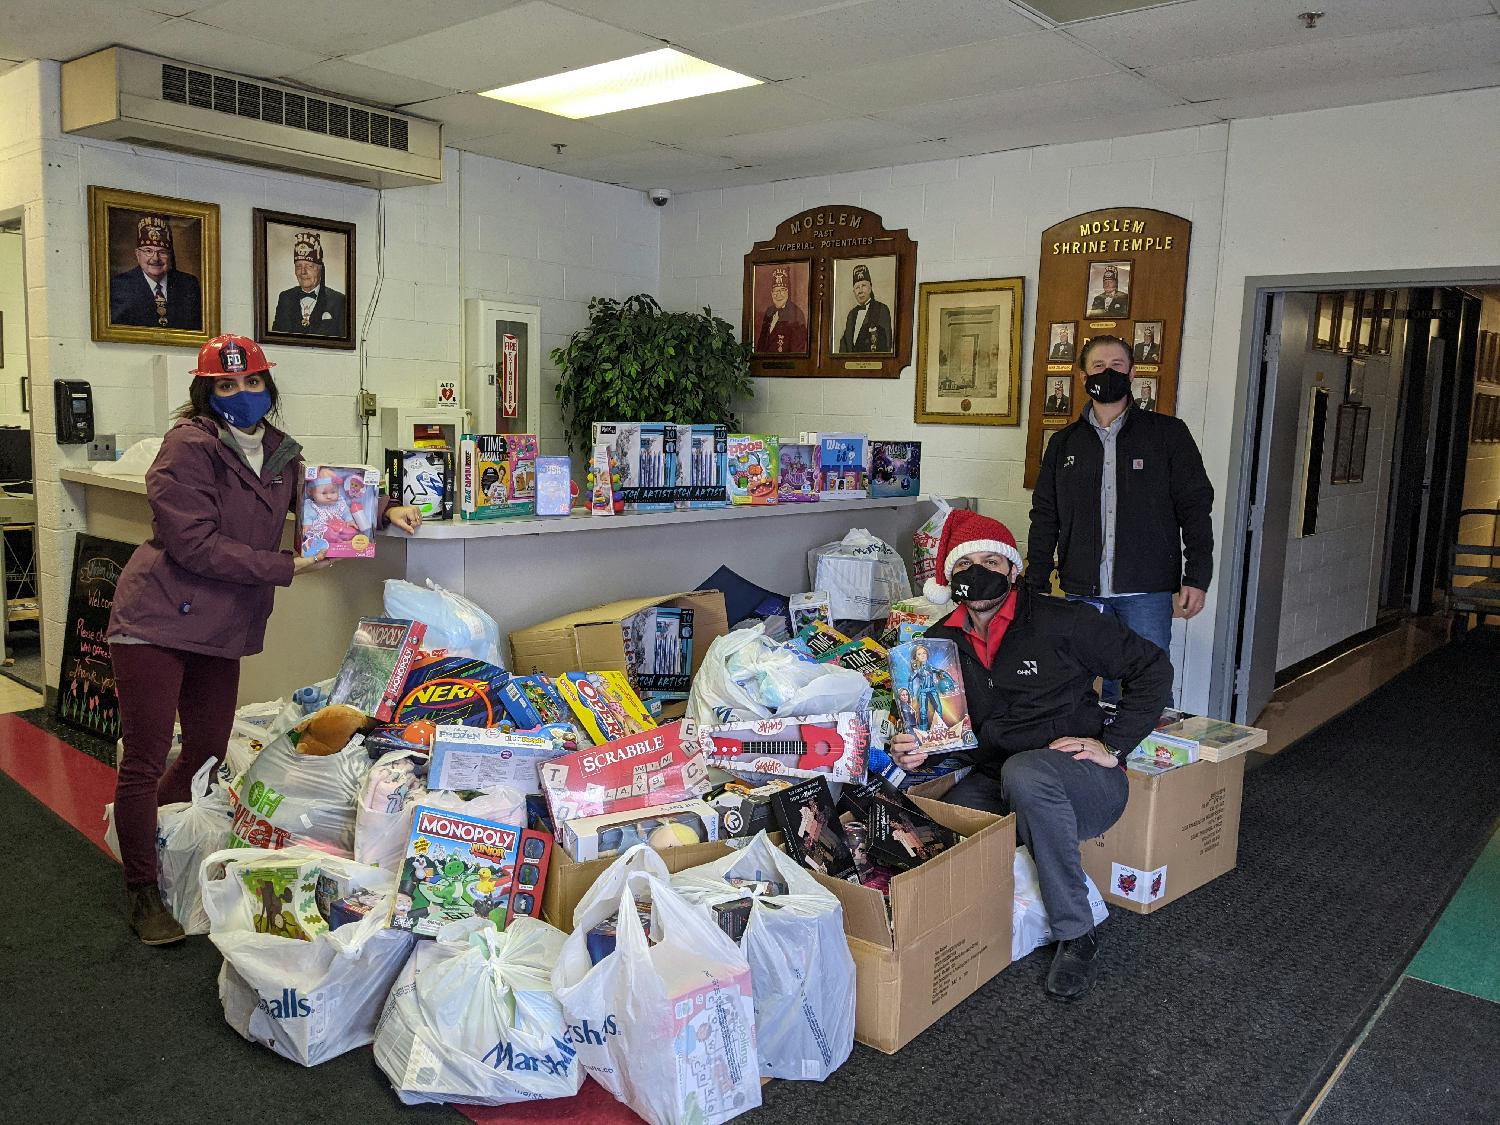 Annual toy donation to Shriners.